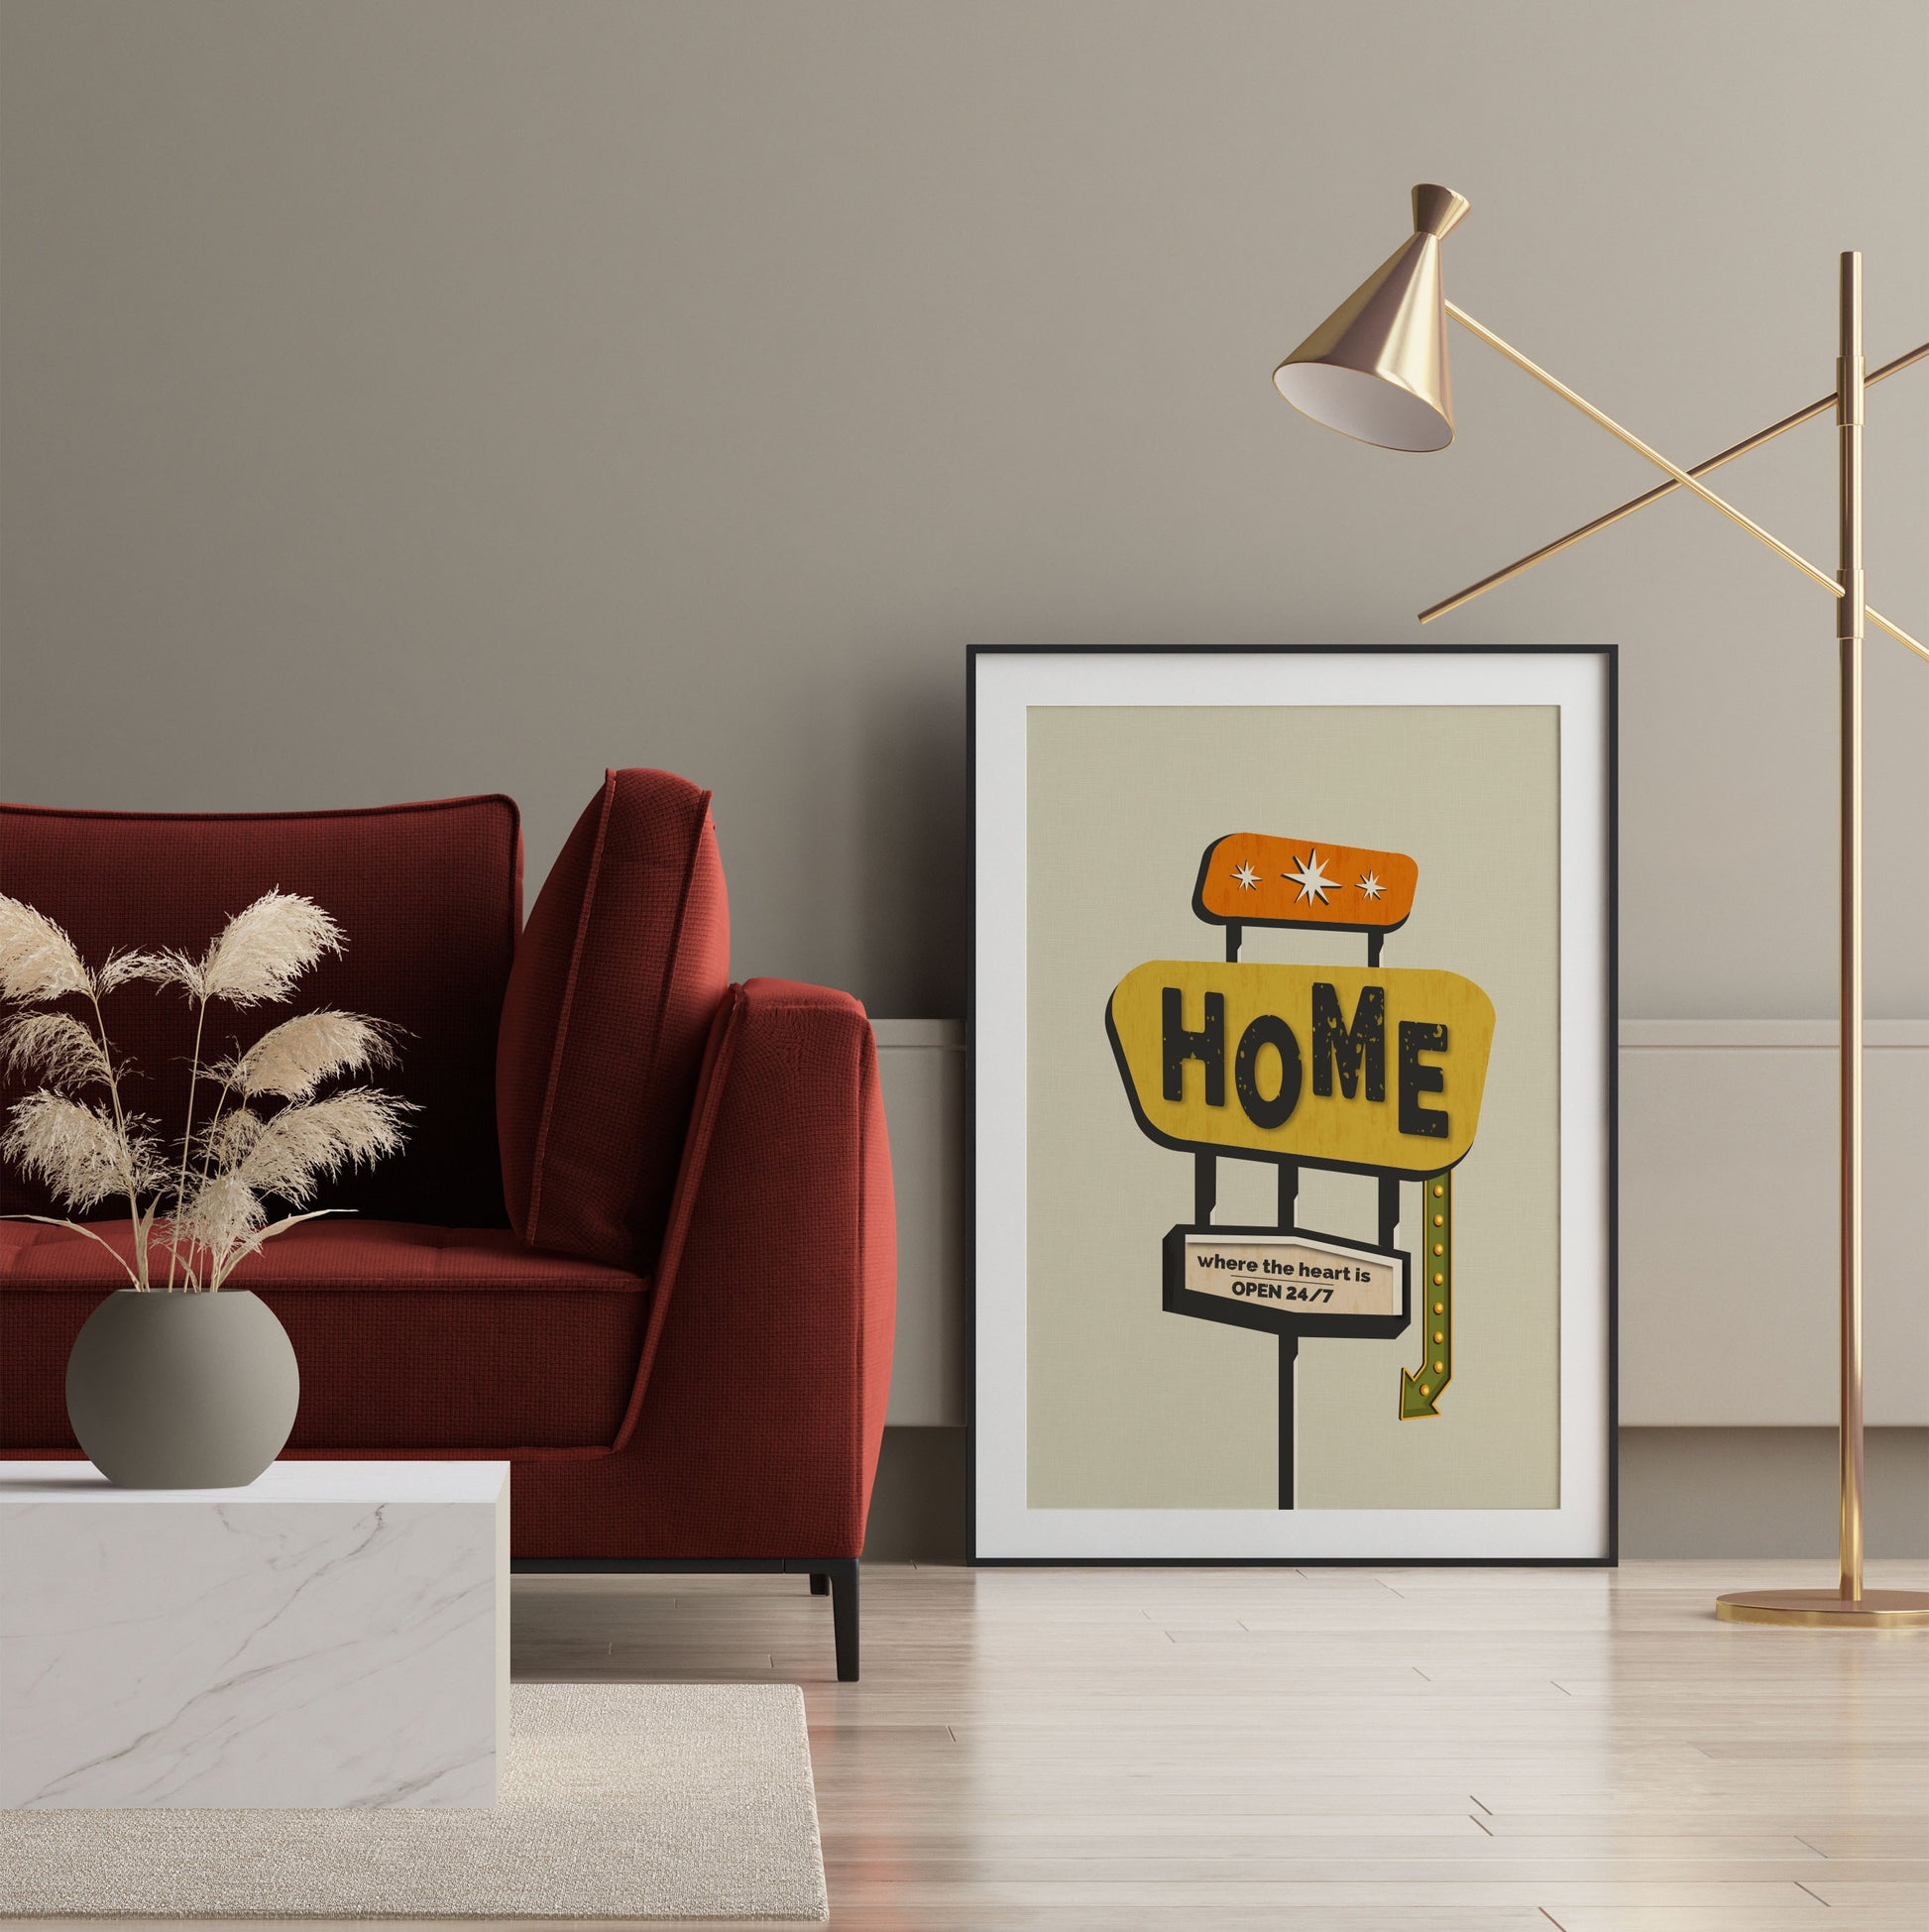 Wall art print with a retro style home sign and "home is where the hears is" quote